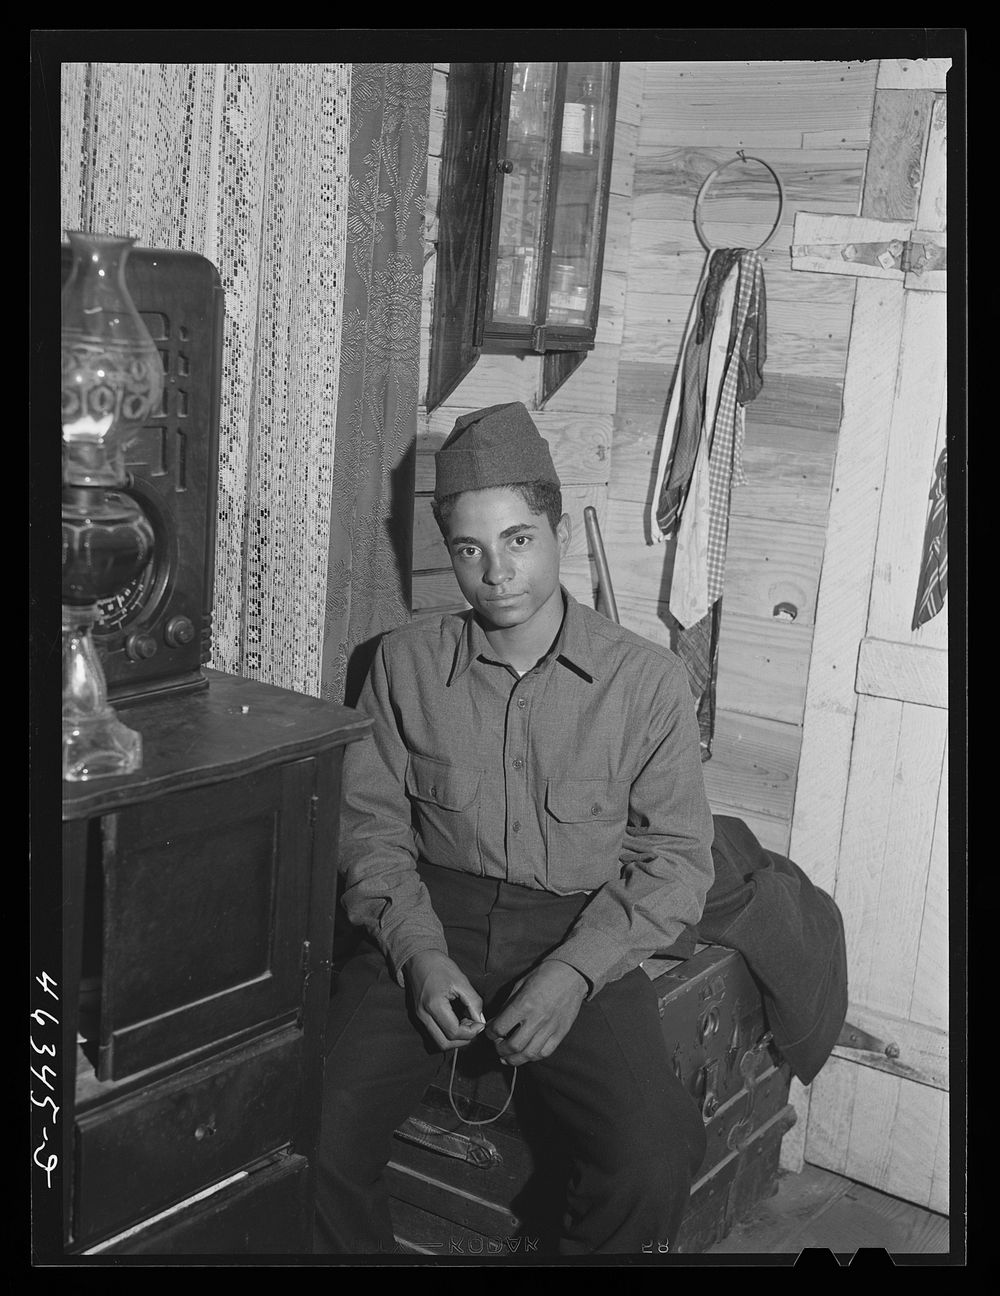 One of the sons of Edgar Jones, FSA (Farm Security Administration) client in Woodville, Greene County, Georgia. He works at…